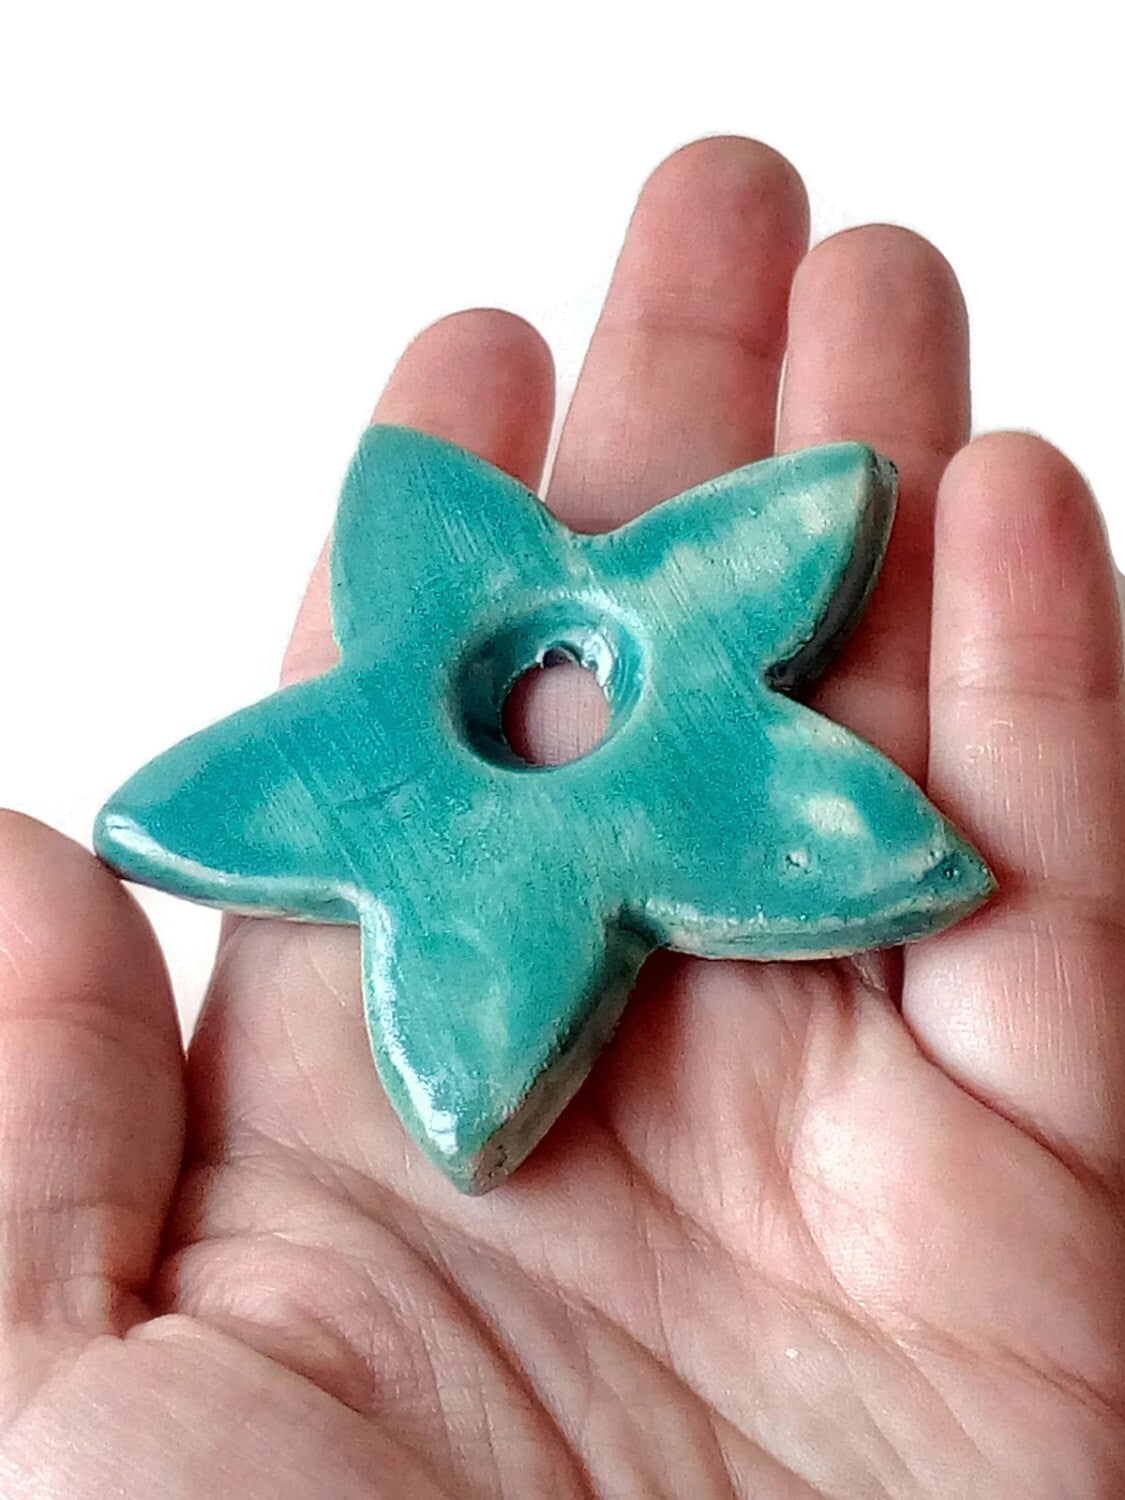 Unique Clay Charms For Unique Jewelry Making, Abstract Handmade Ceramic, Cool Random Large Star Pendant Necklace - Ceramica Ana Rafael